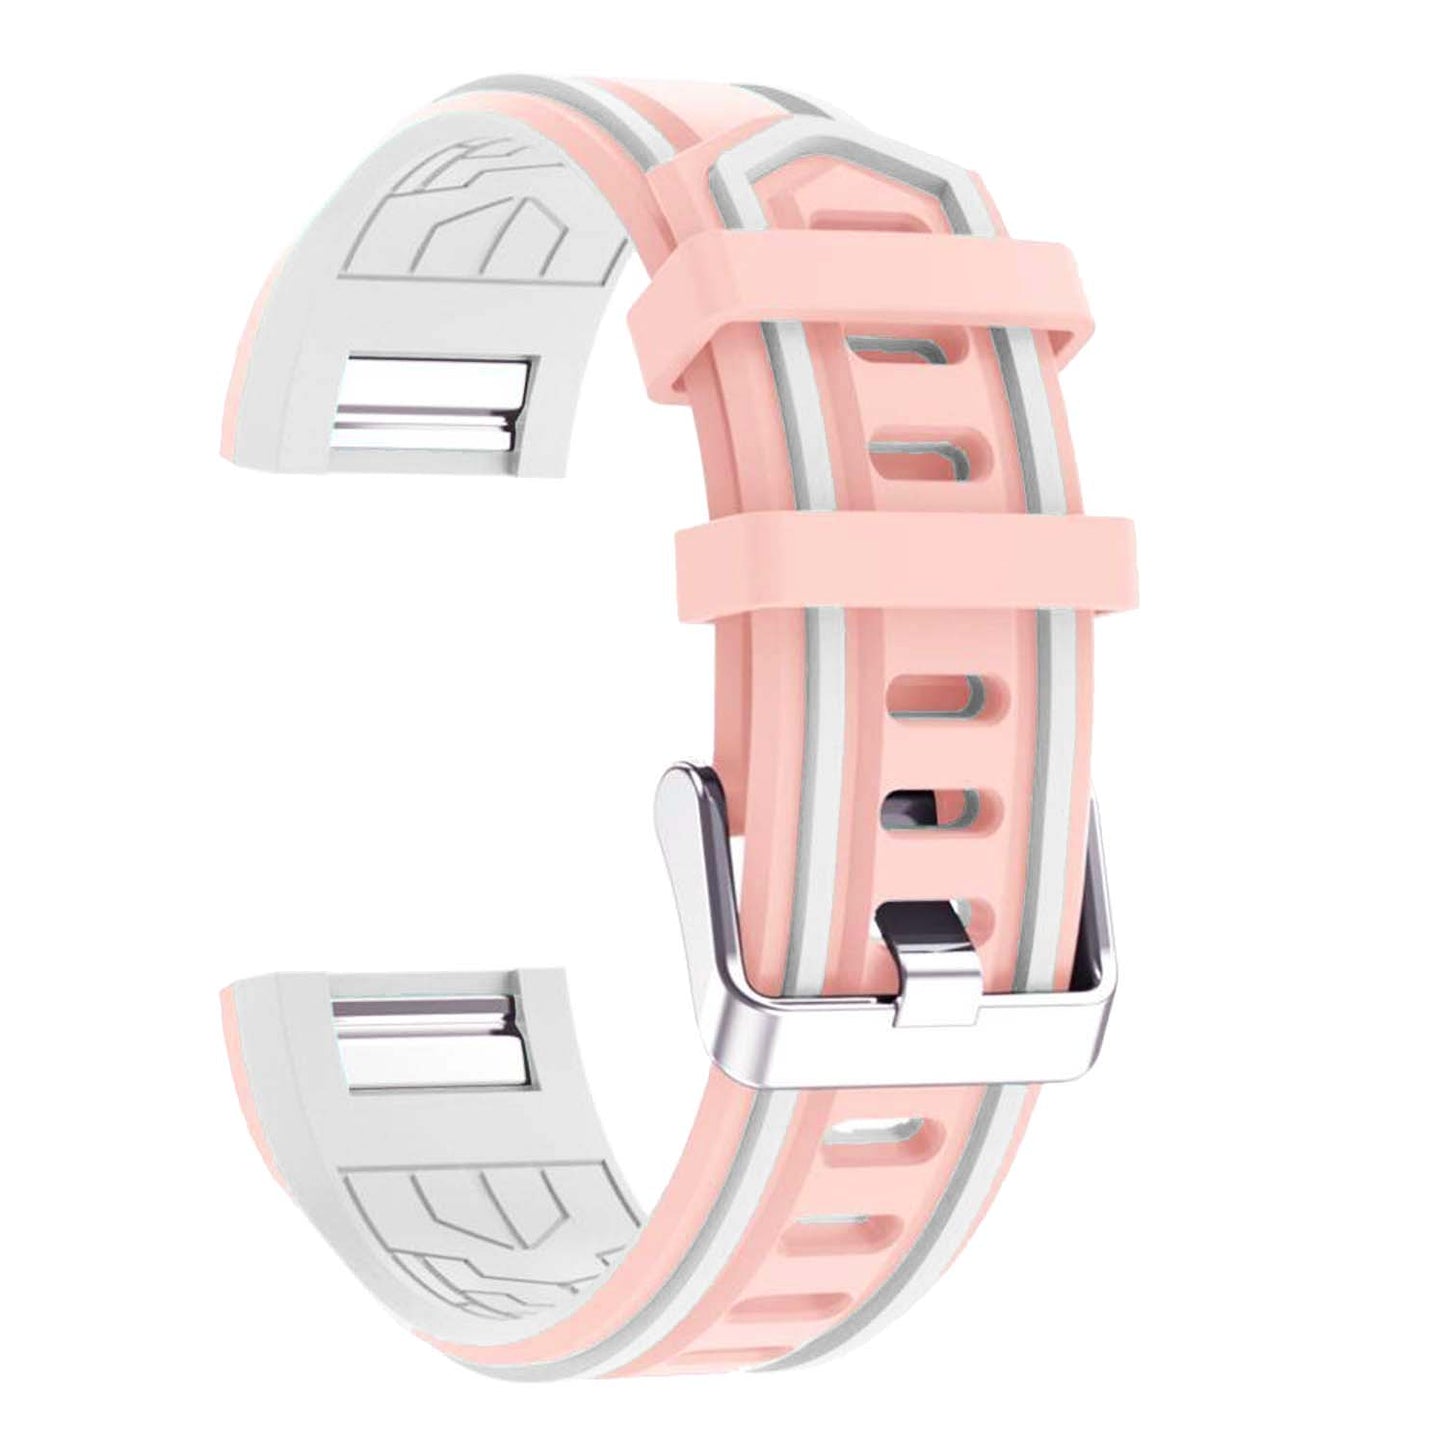 Racing Stripe RubberBand for Fitbit Charge 2